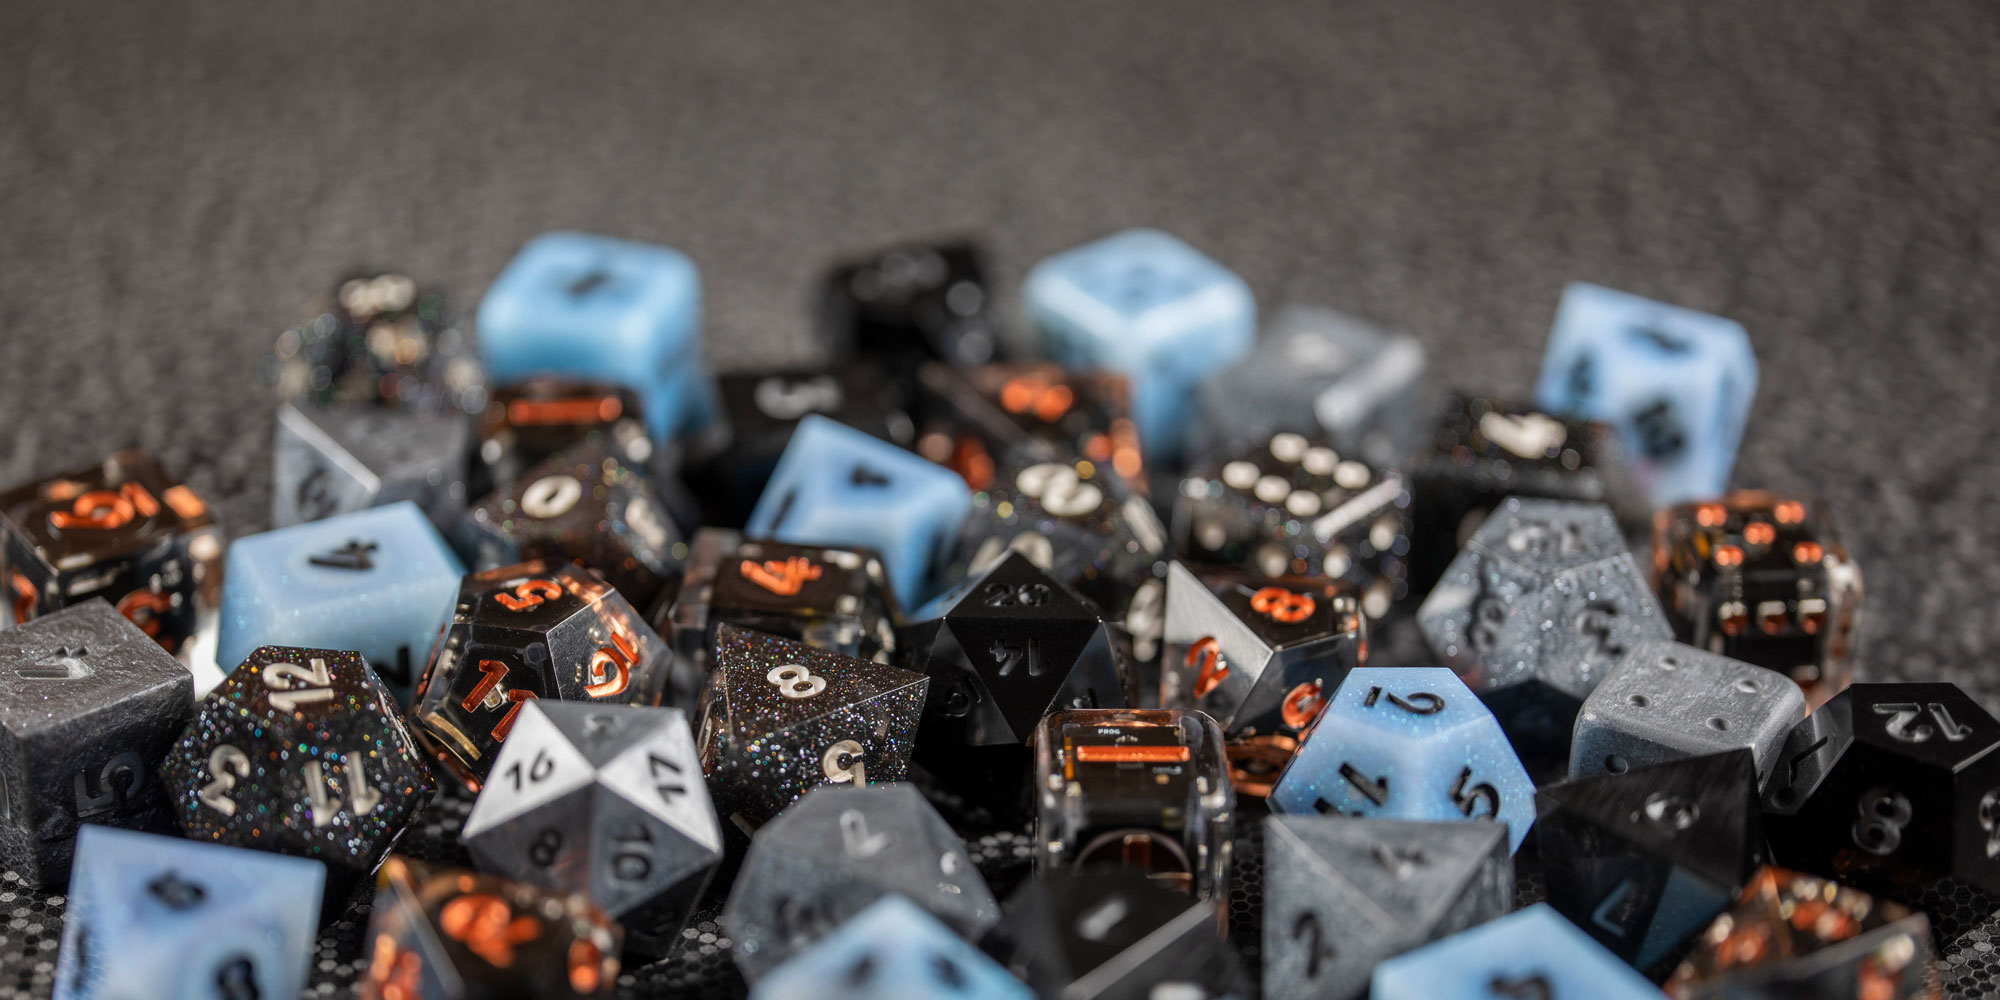 Photograph of a large pile of Pixels Dice in various colorways. All lights are off, making them look like regular dice.